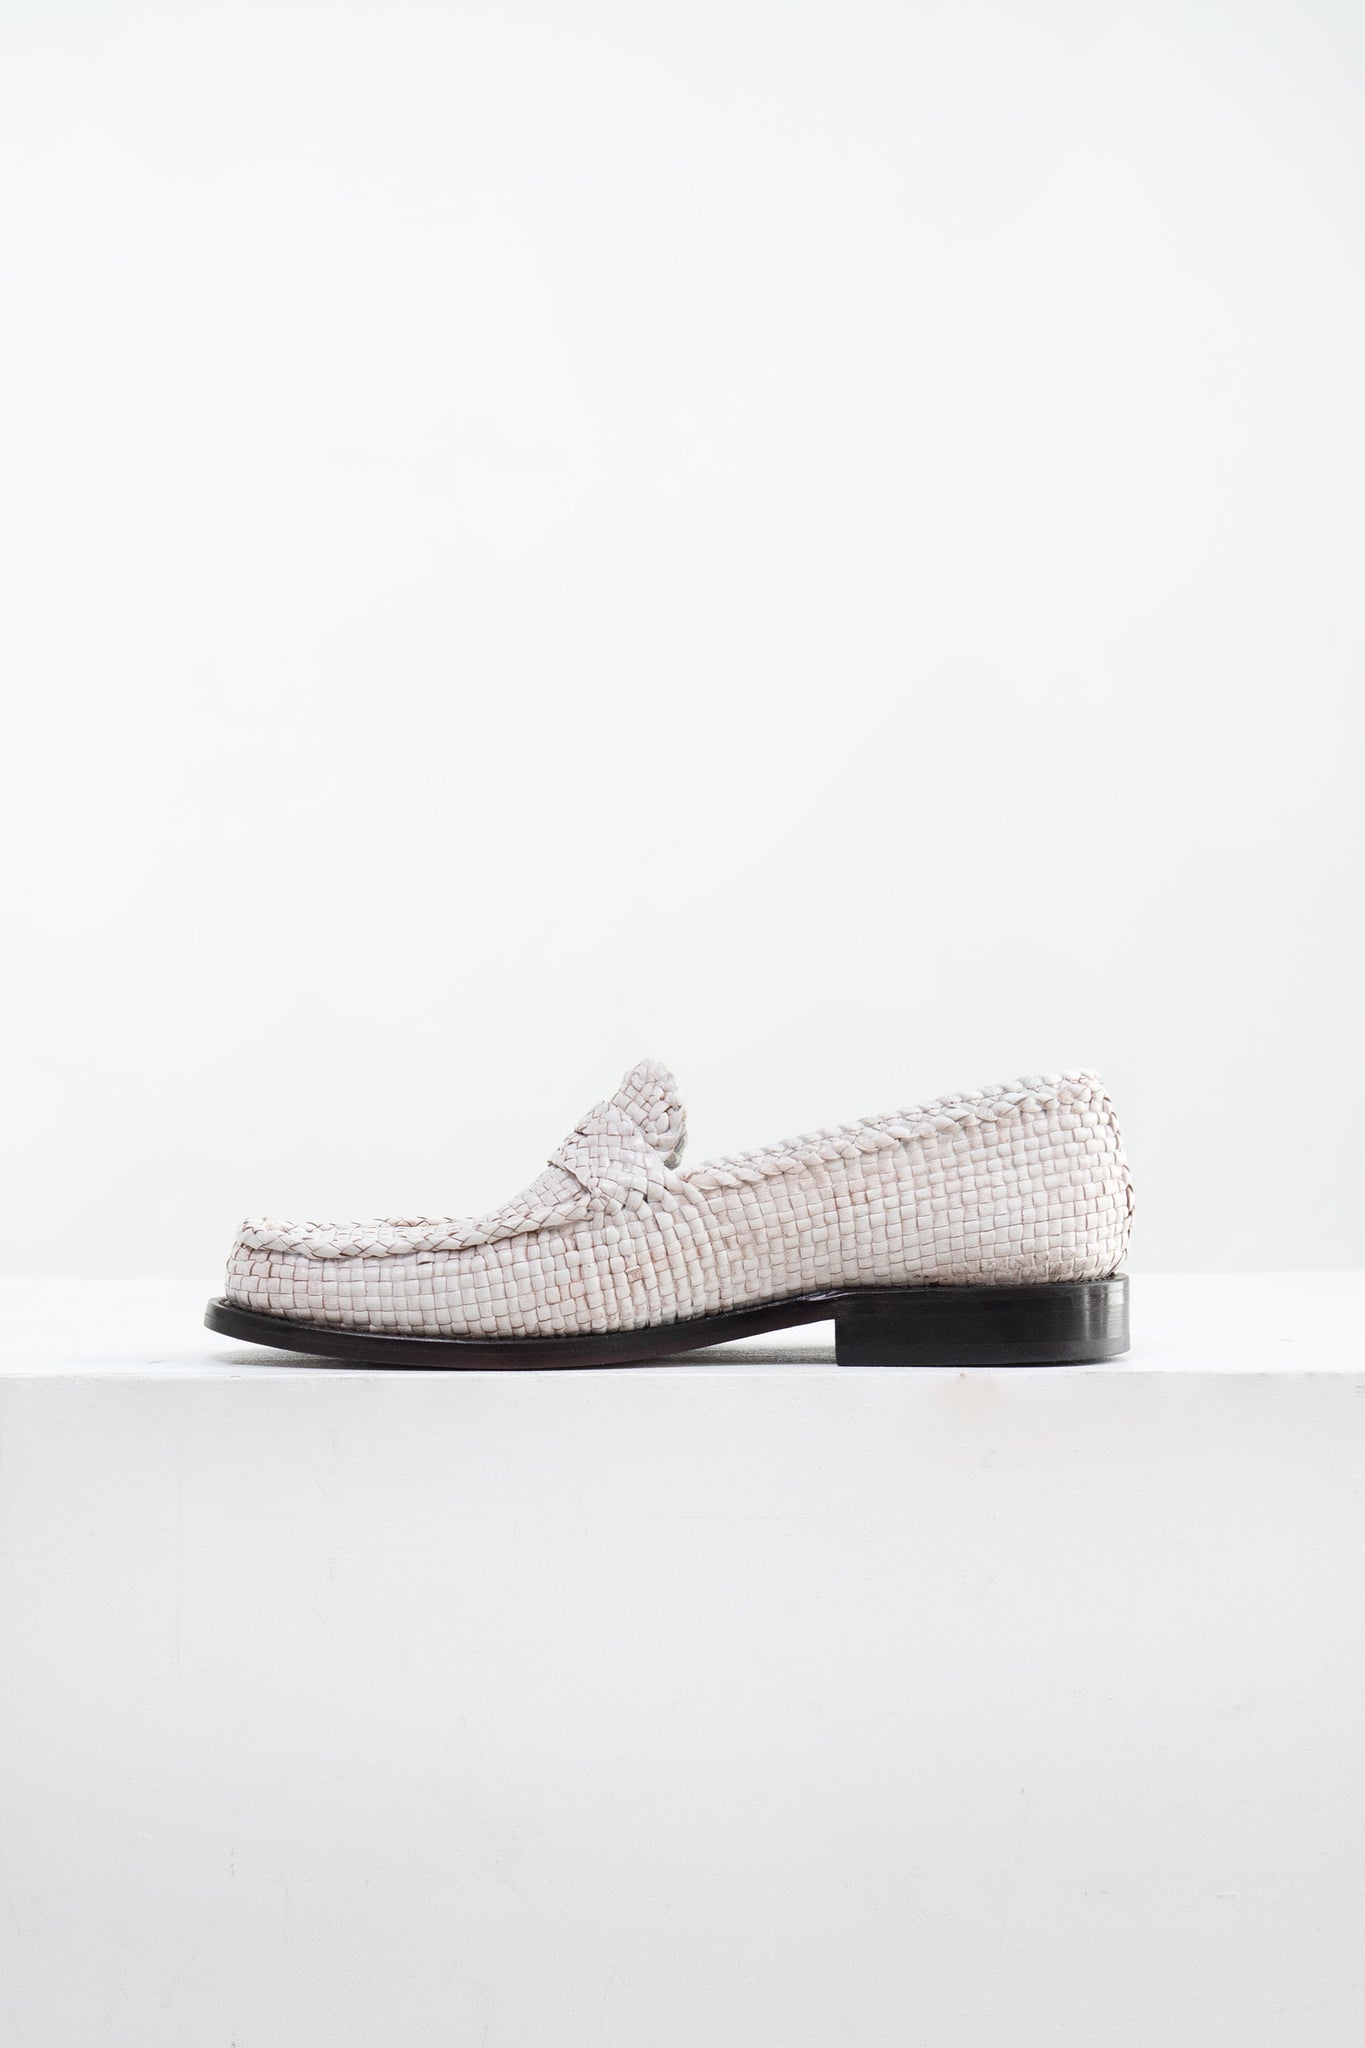 MARNI - Woven Leather Bambi Loafer, Lily White